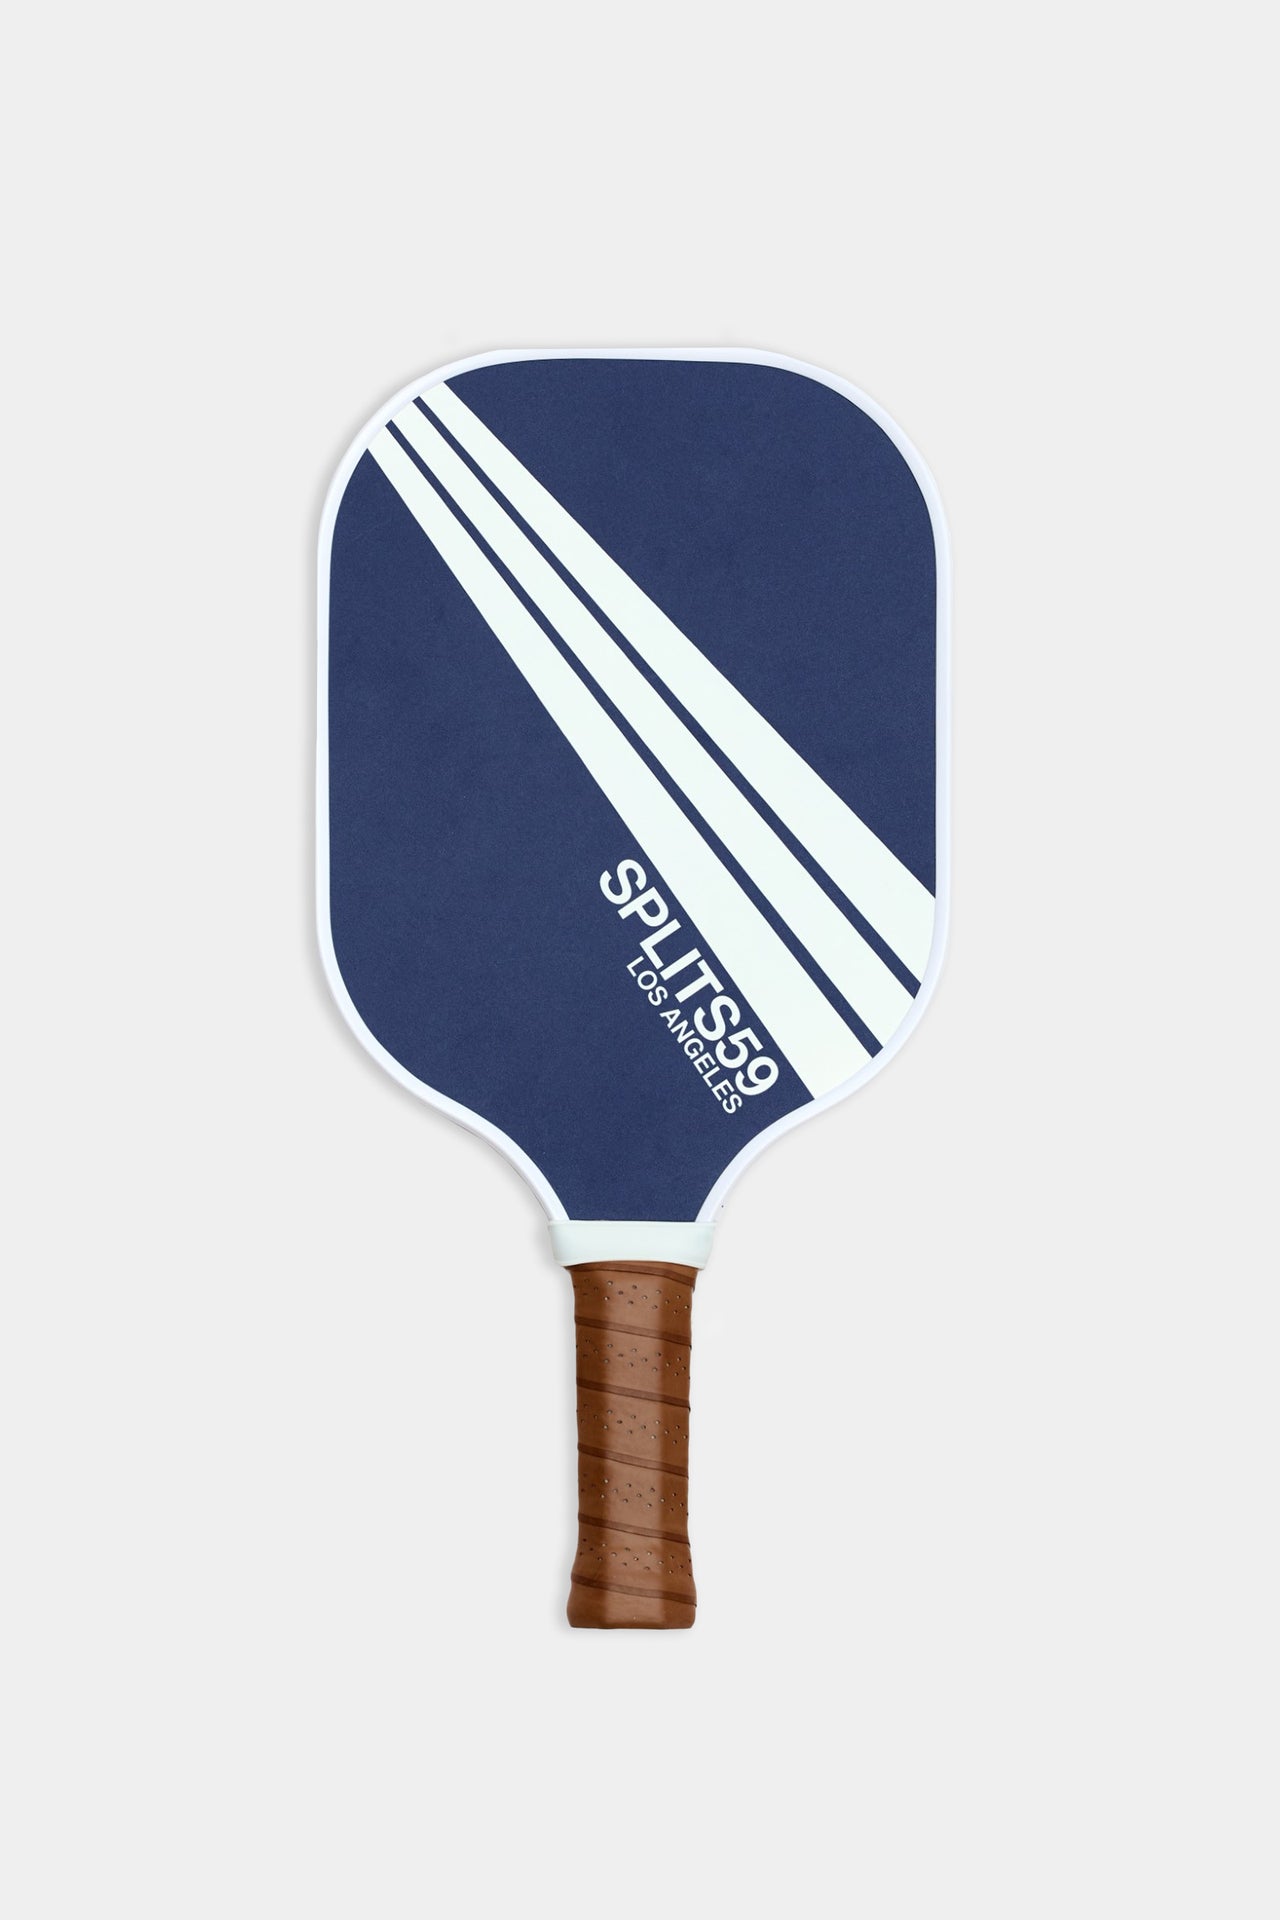 SPLITS59 Pickleball Paddle in blue and white on a white background.